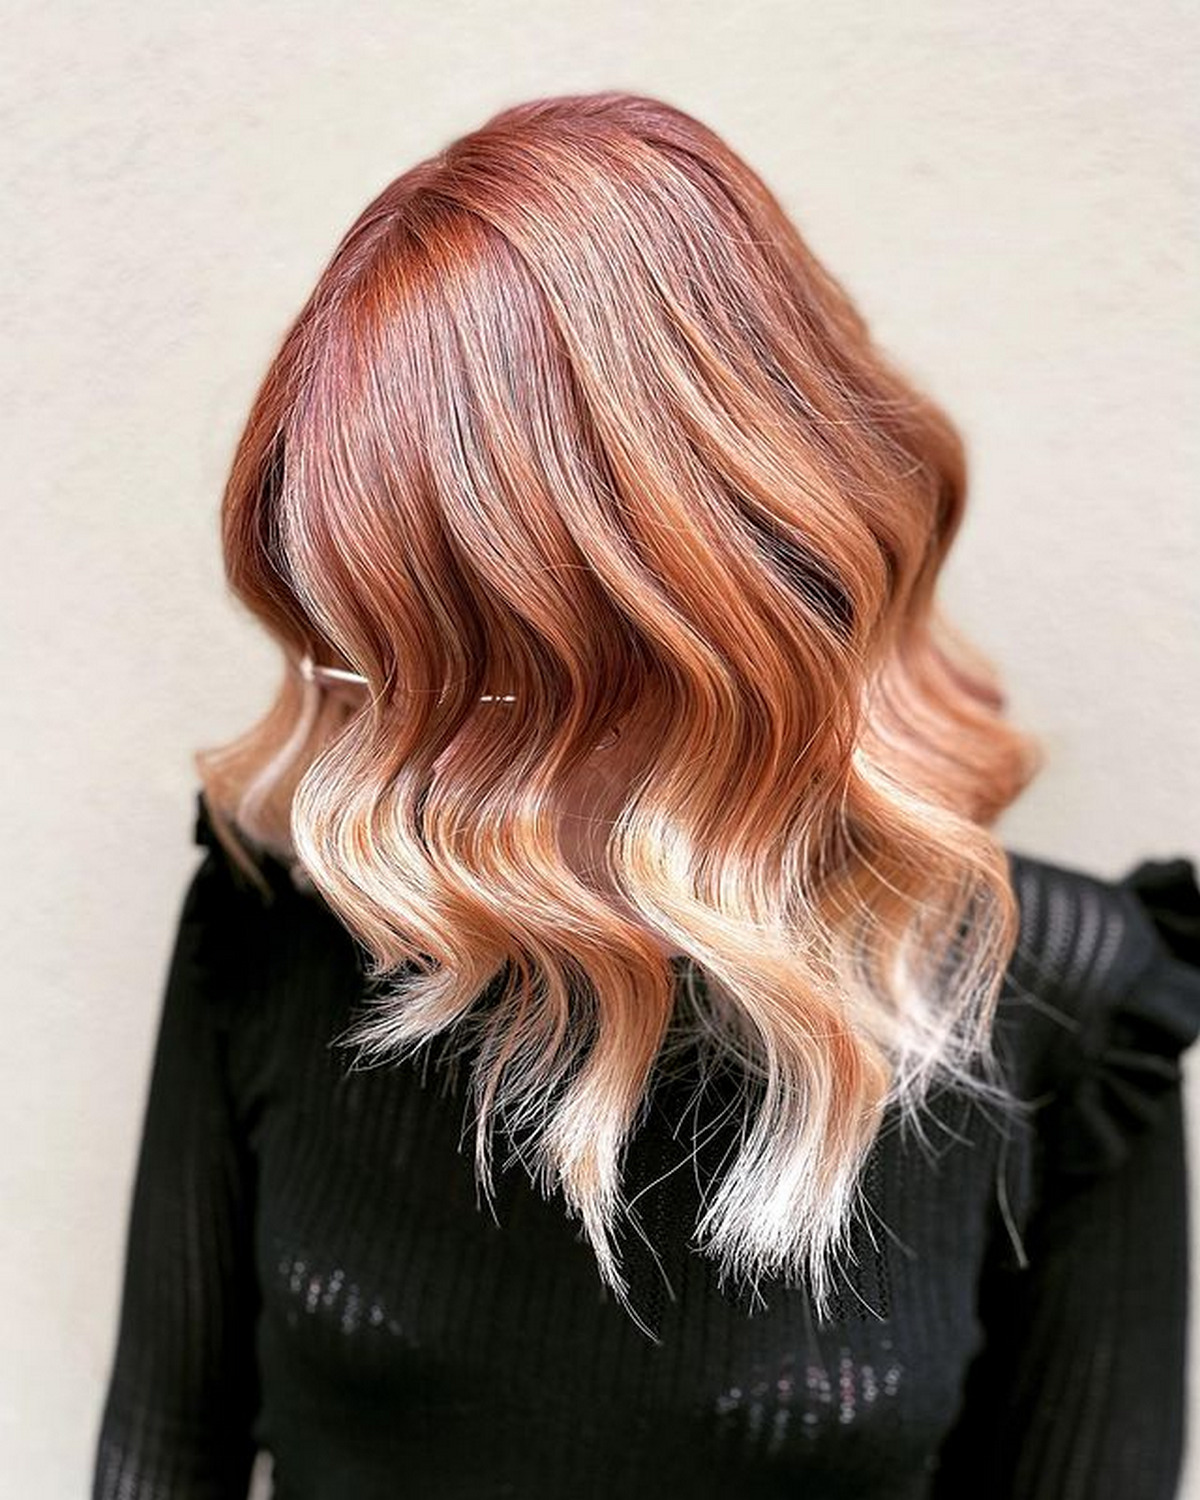 Medium-Length Hair With Copper Ombre